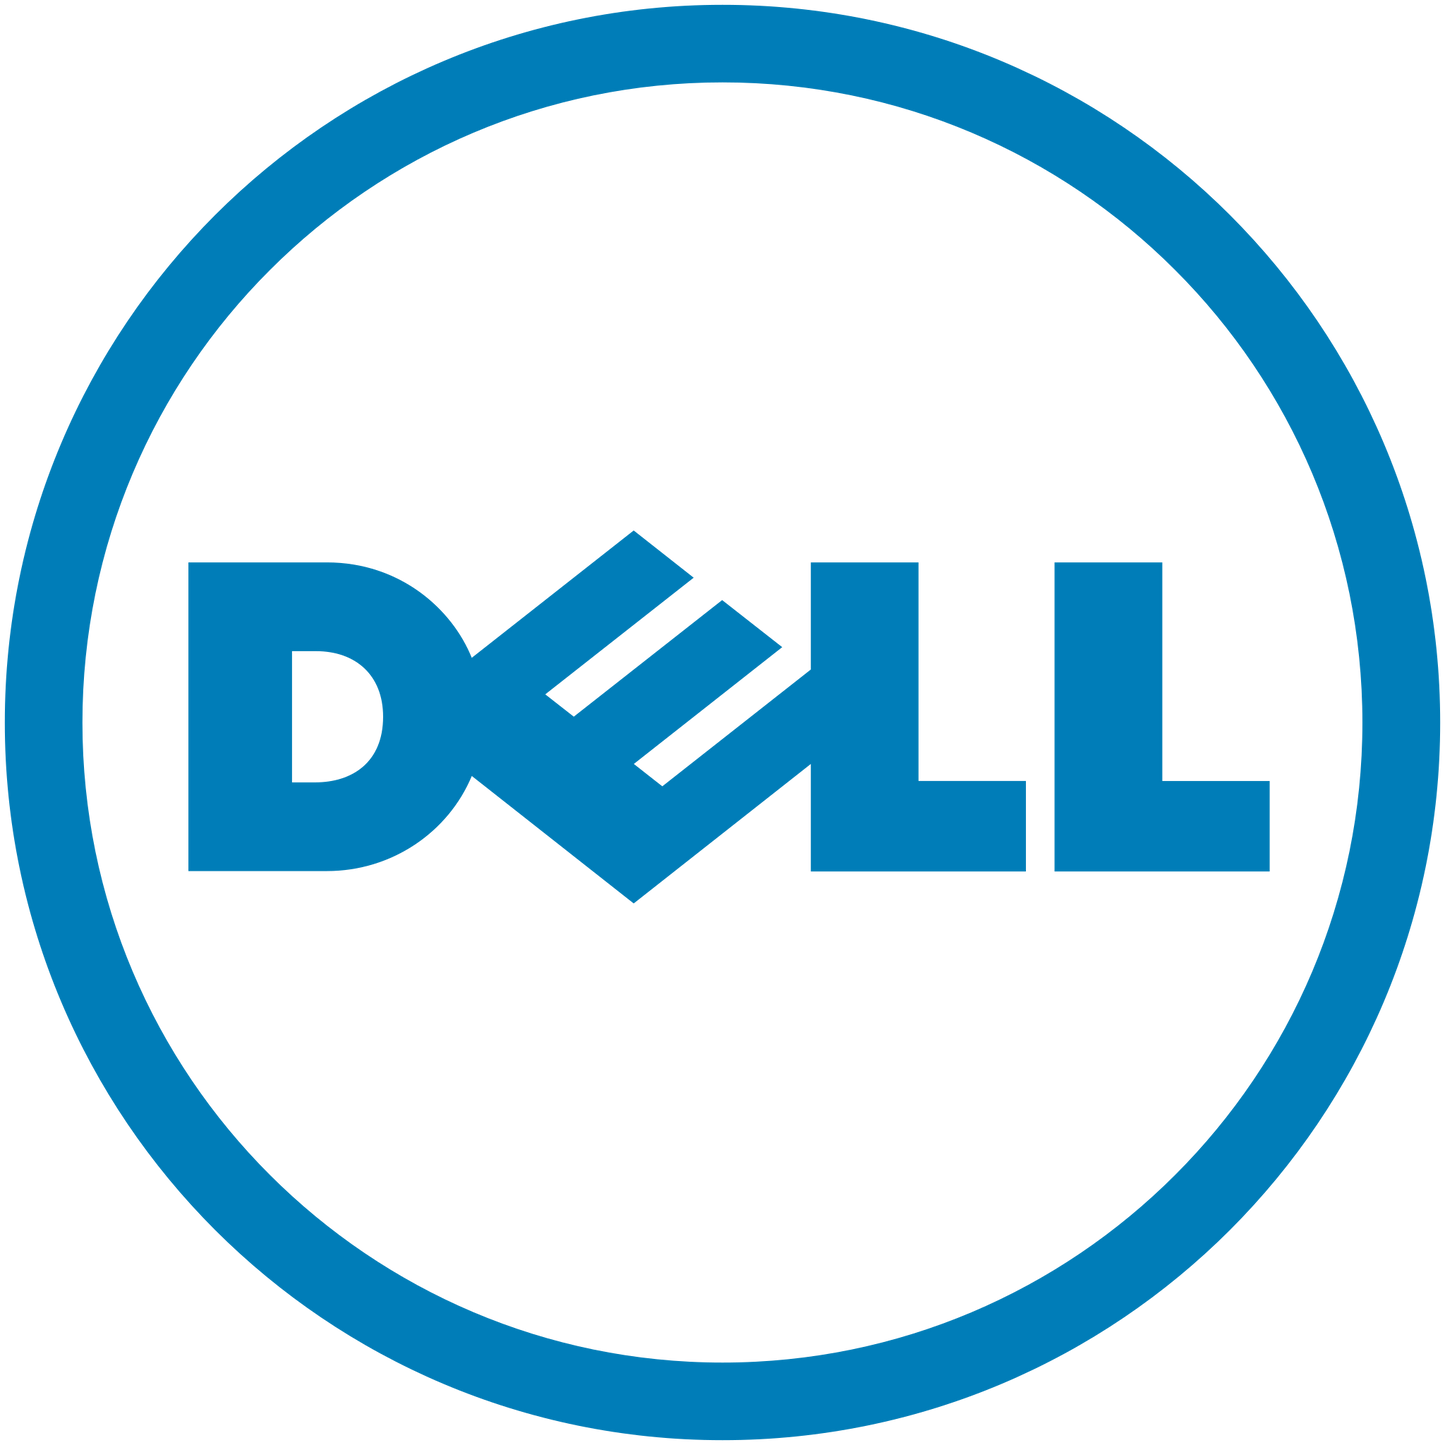 Dell WM118 Wireless Mouse, 2.4 Ghz with USB Nano Receiver, Optical Tracking, 12-Months Battery Life, Ambidextrous, Pc/Mac/Laptop - Black.